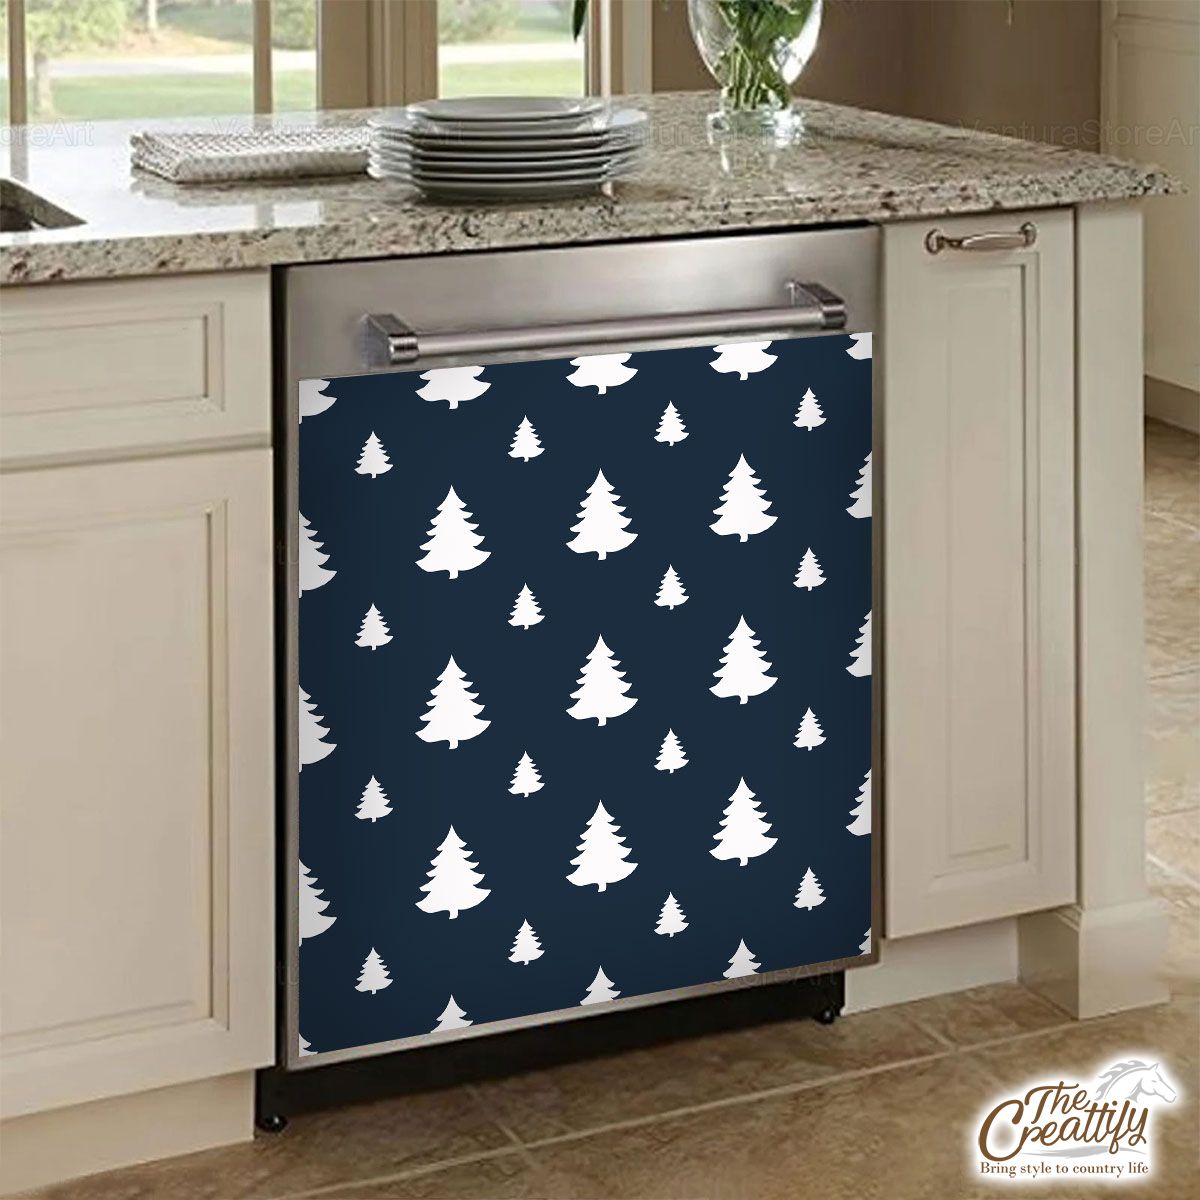 Pine Tree Sillhouette Pattern Dishwasher Cover